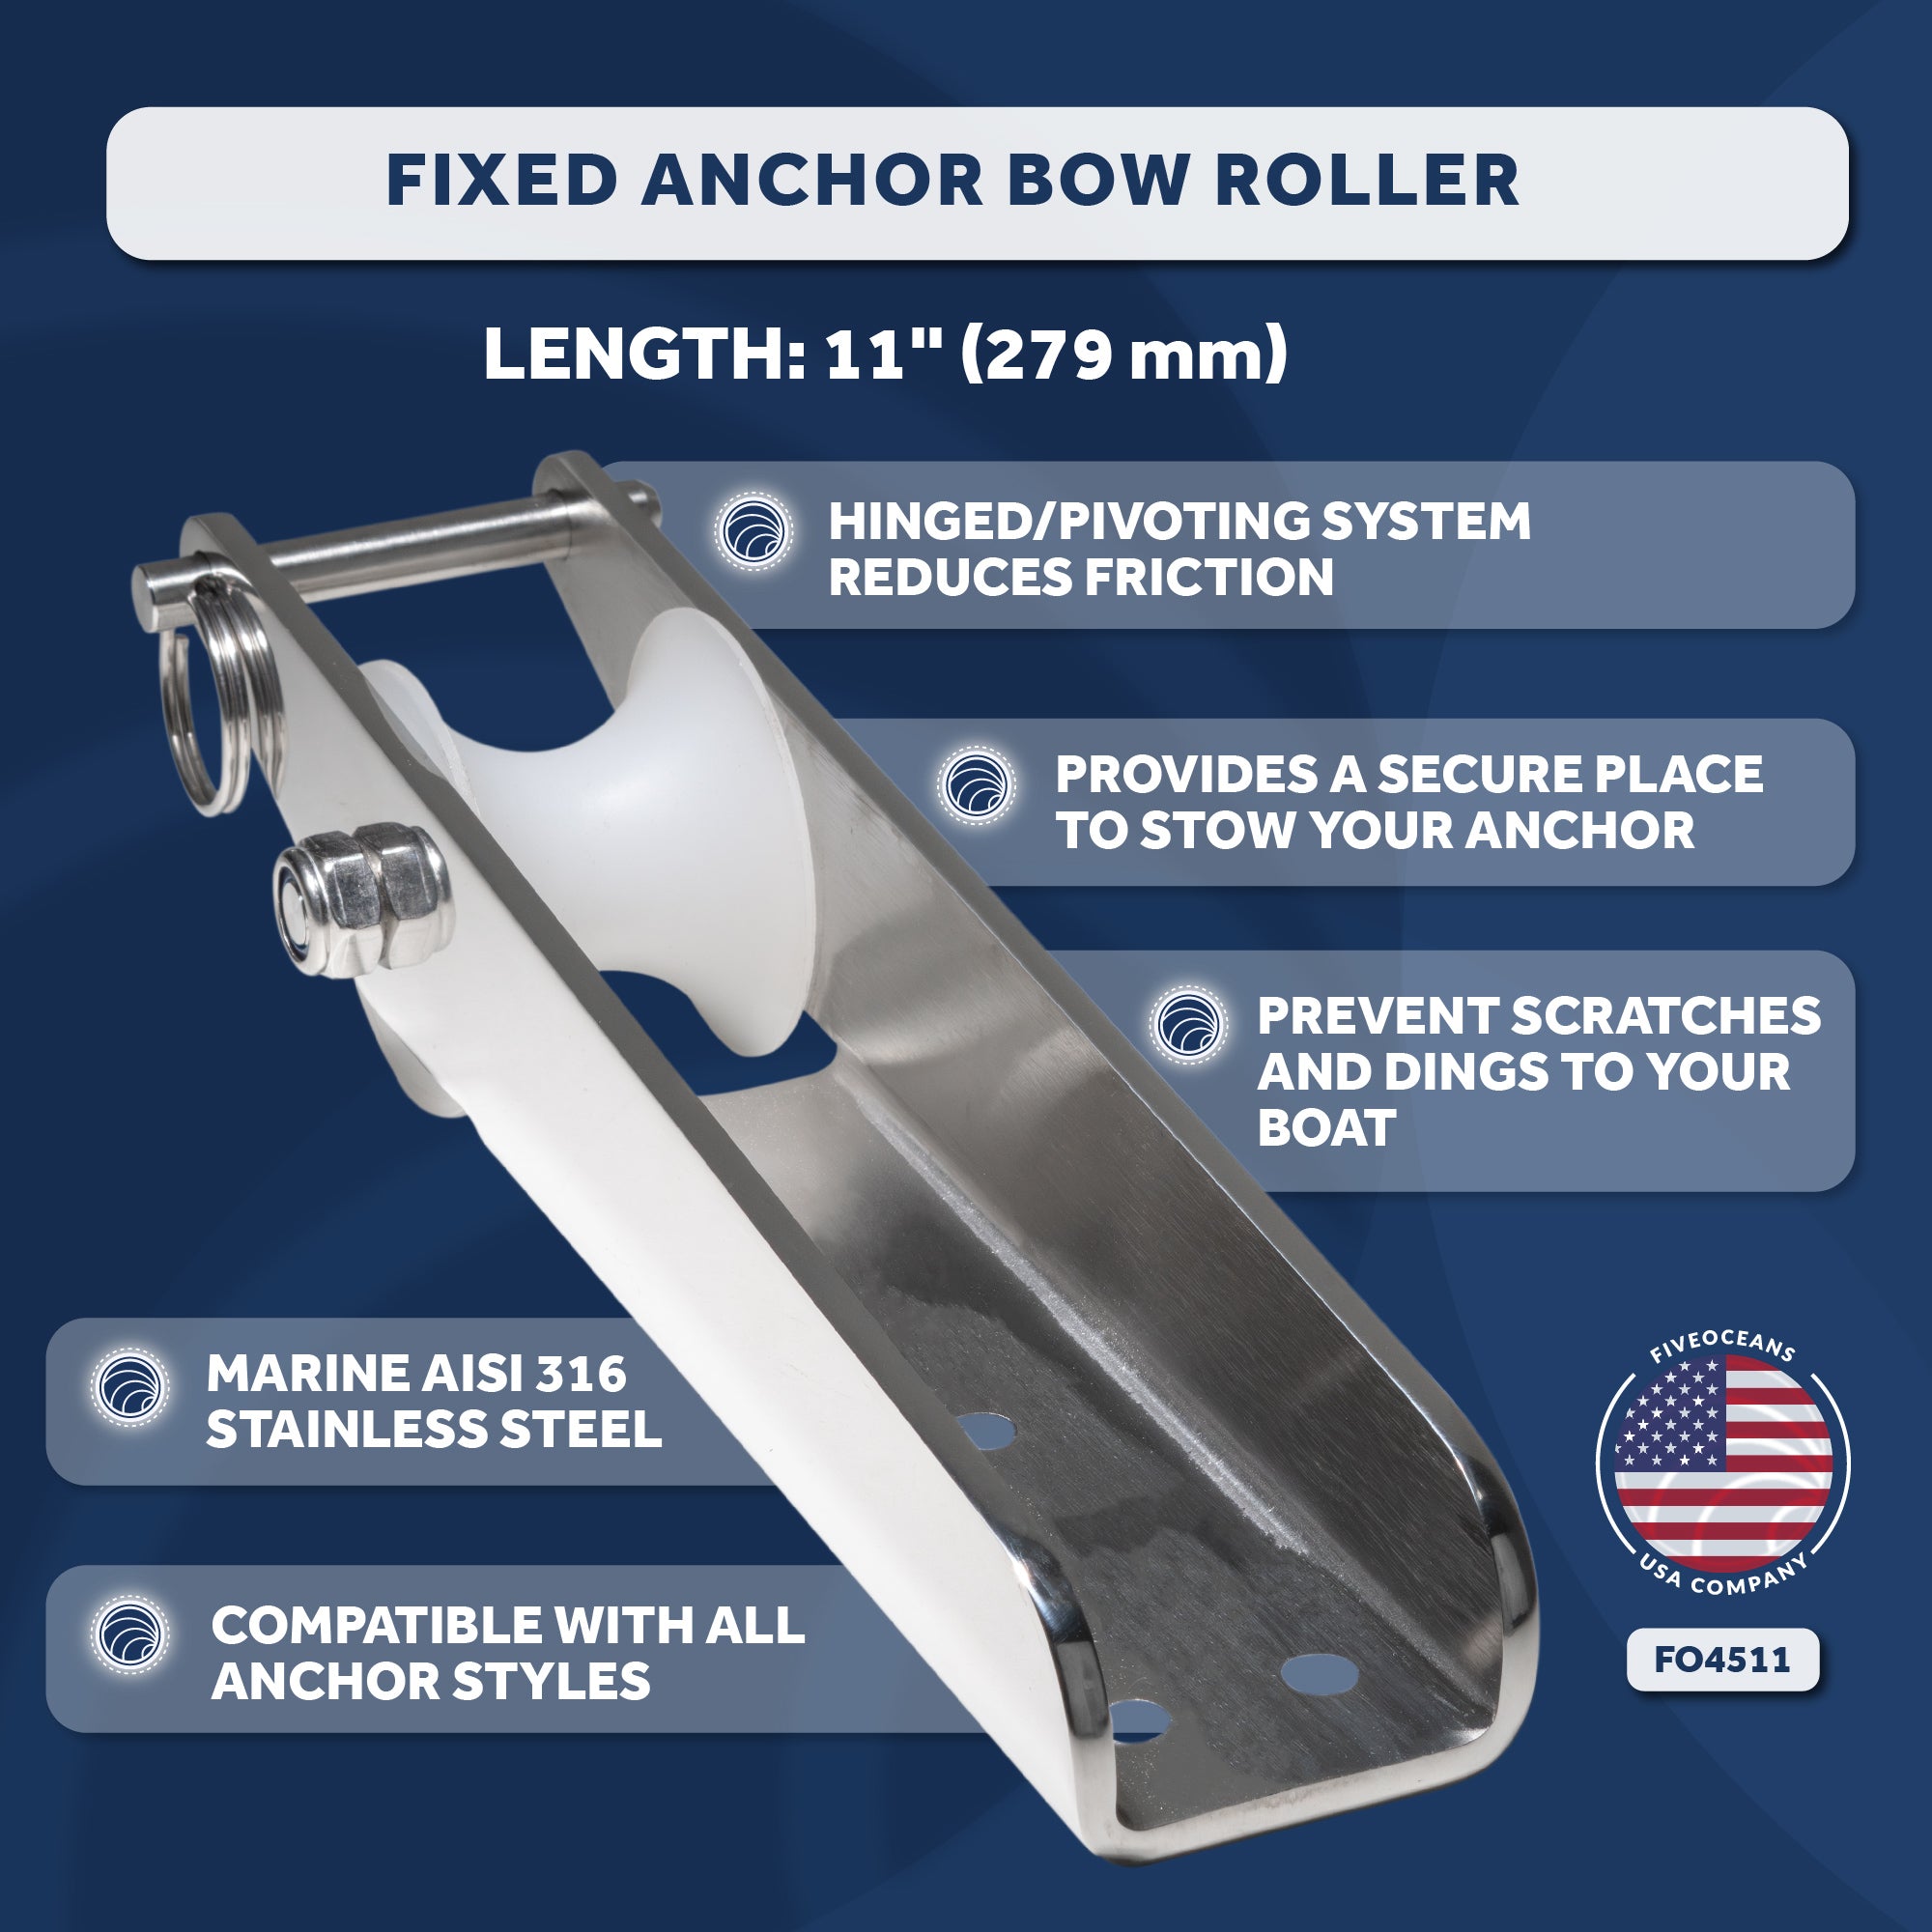 Fixed Anchor Bow Roller, Length11", Stainless Steel - FO4511